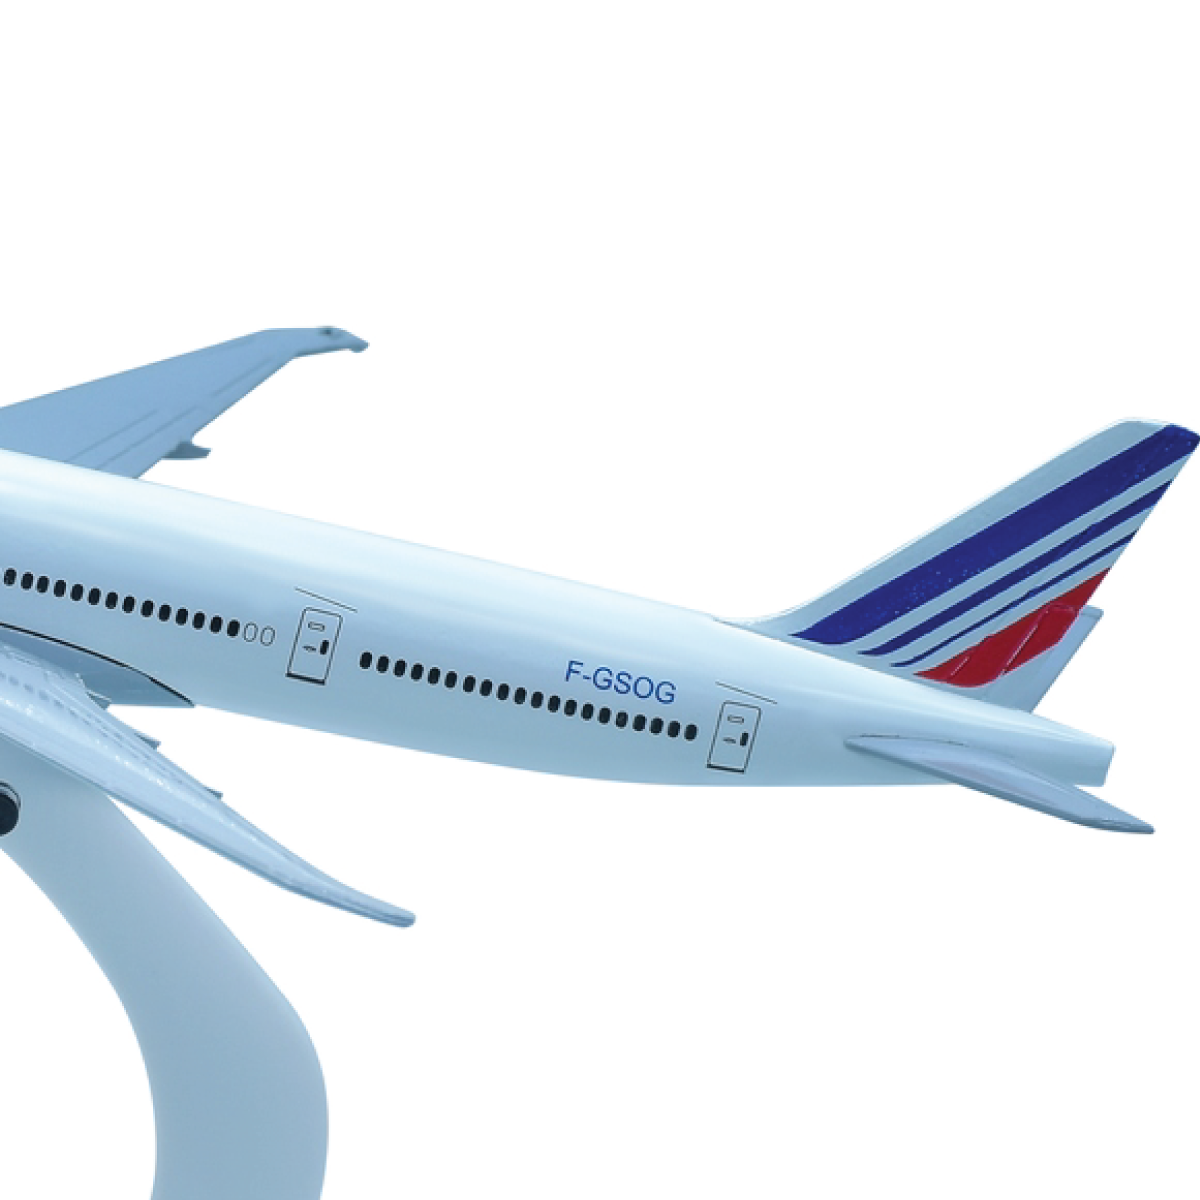 Aircraft Model Big Air France - For Office Use, Personal Use, or Corporate Gifting